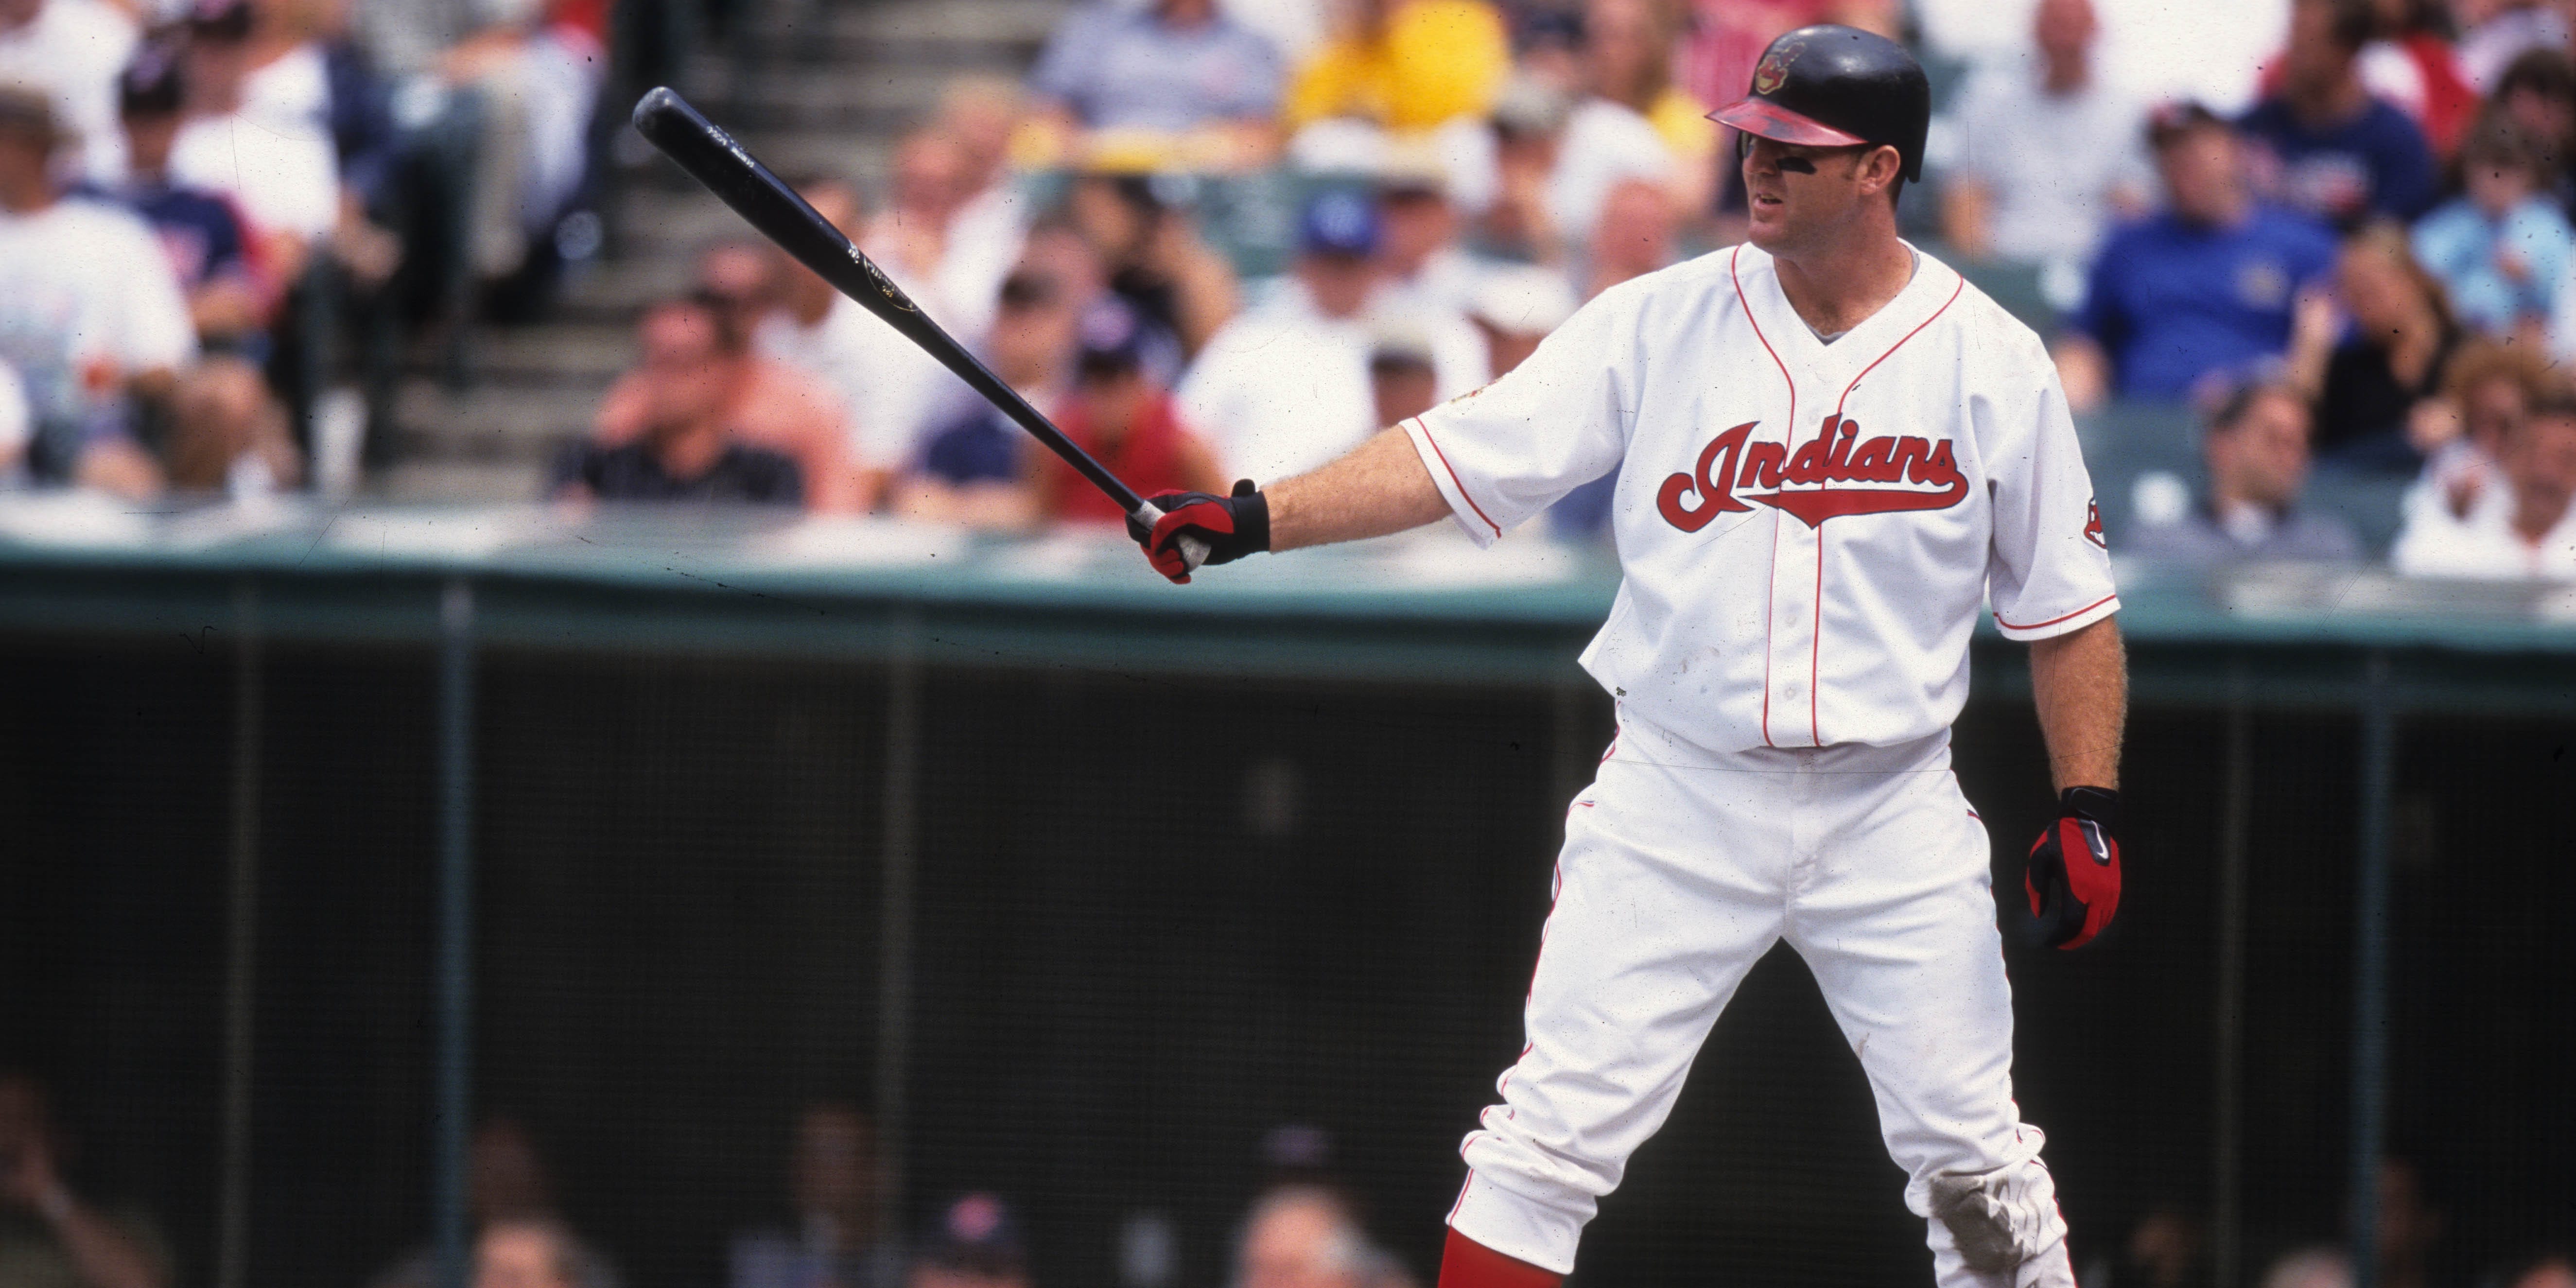 Hall of Famer Jim Thome to be Honored During Musial Awards - MPress